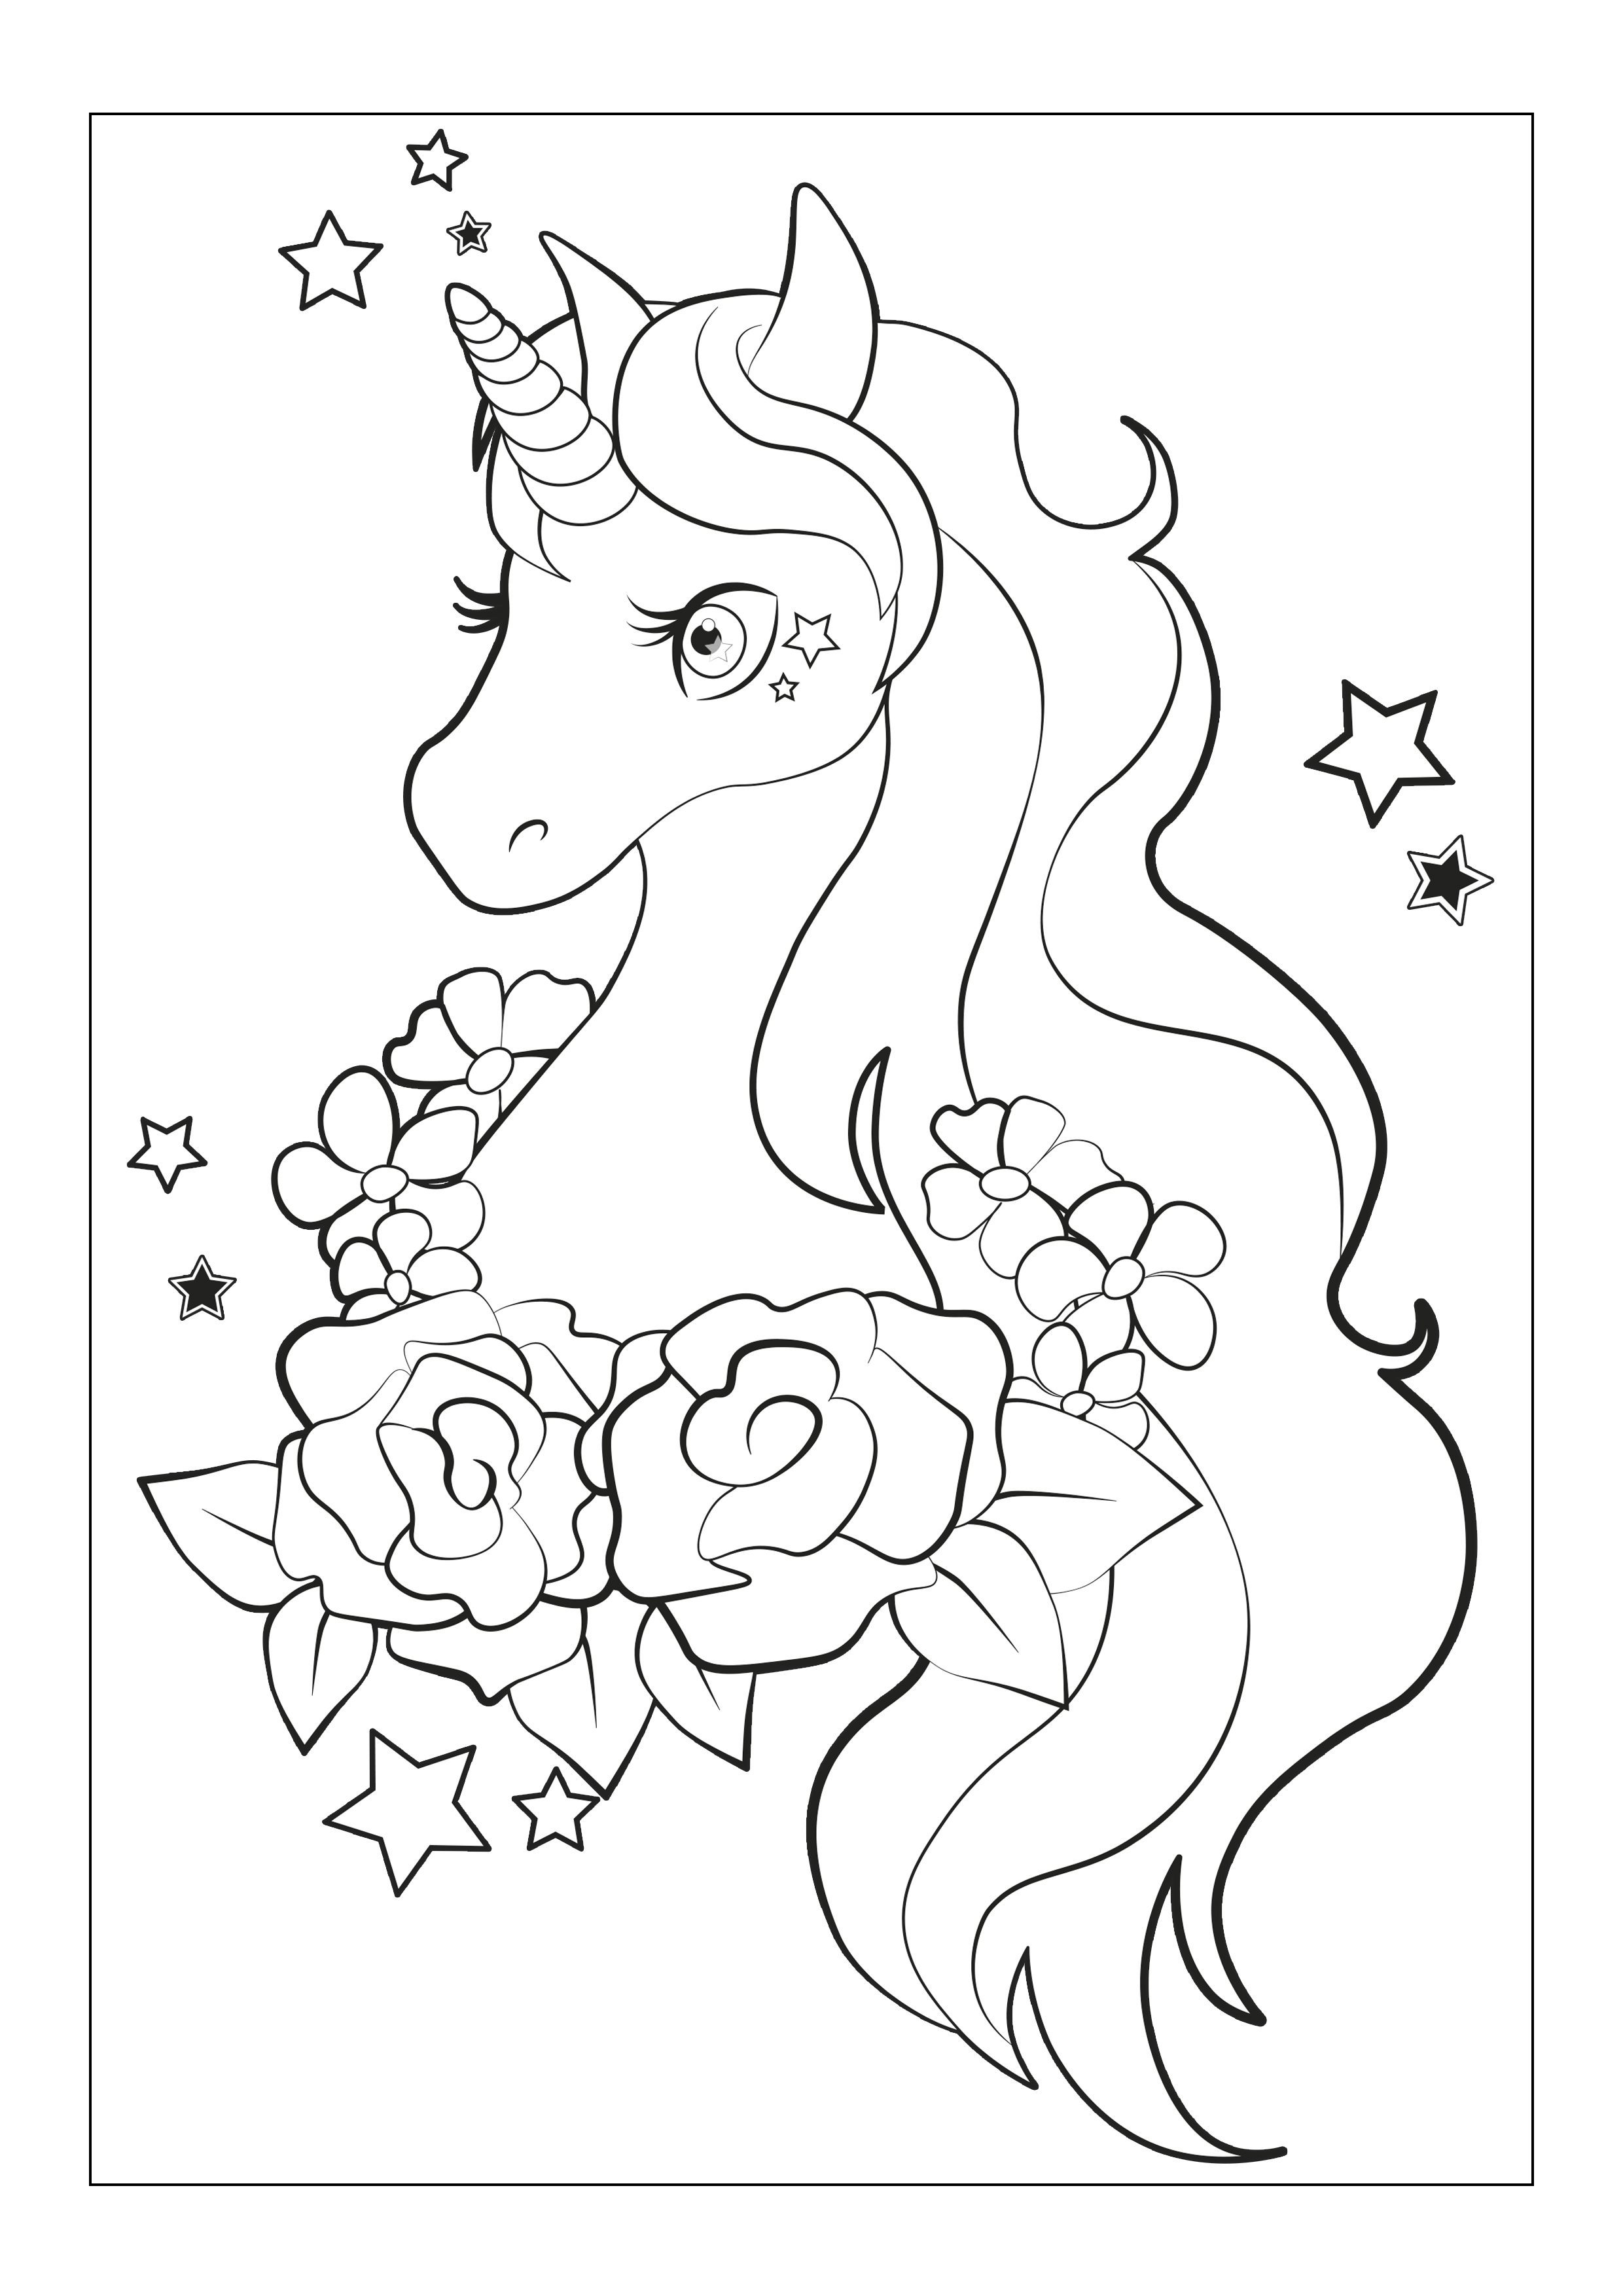 Free Unicorn Coloring Pages For Kids Coloringbay Images and Photos finder